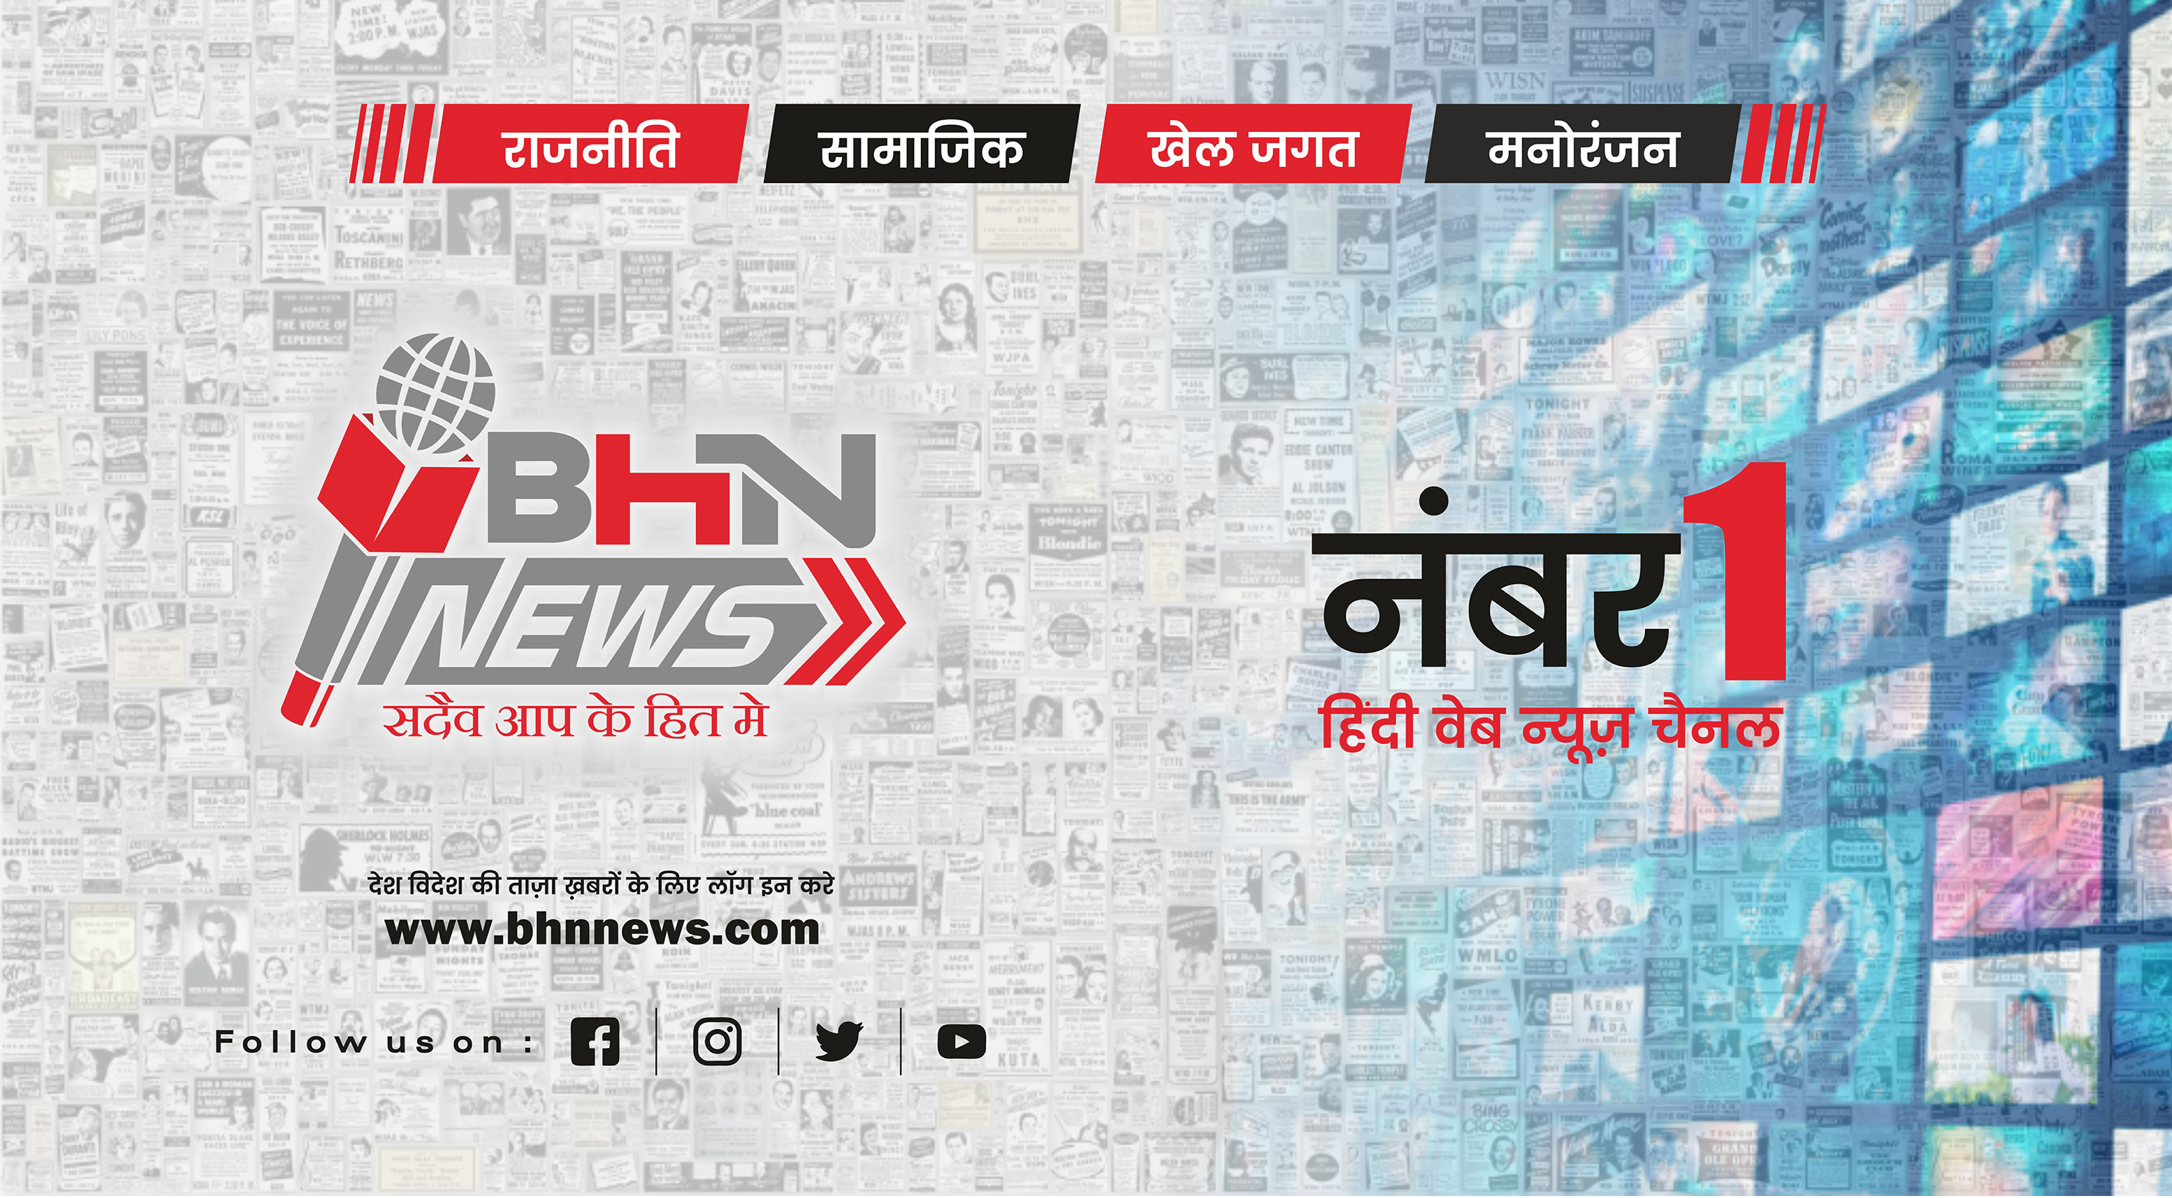 BHN News is Re-imagining the World of Journalism